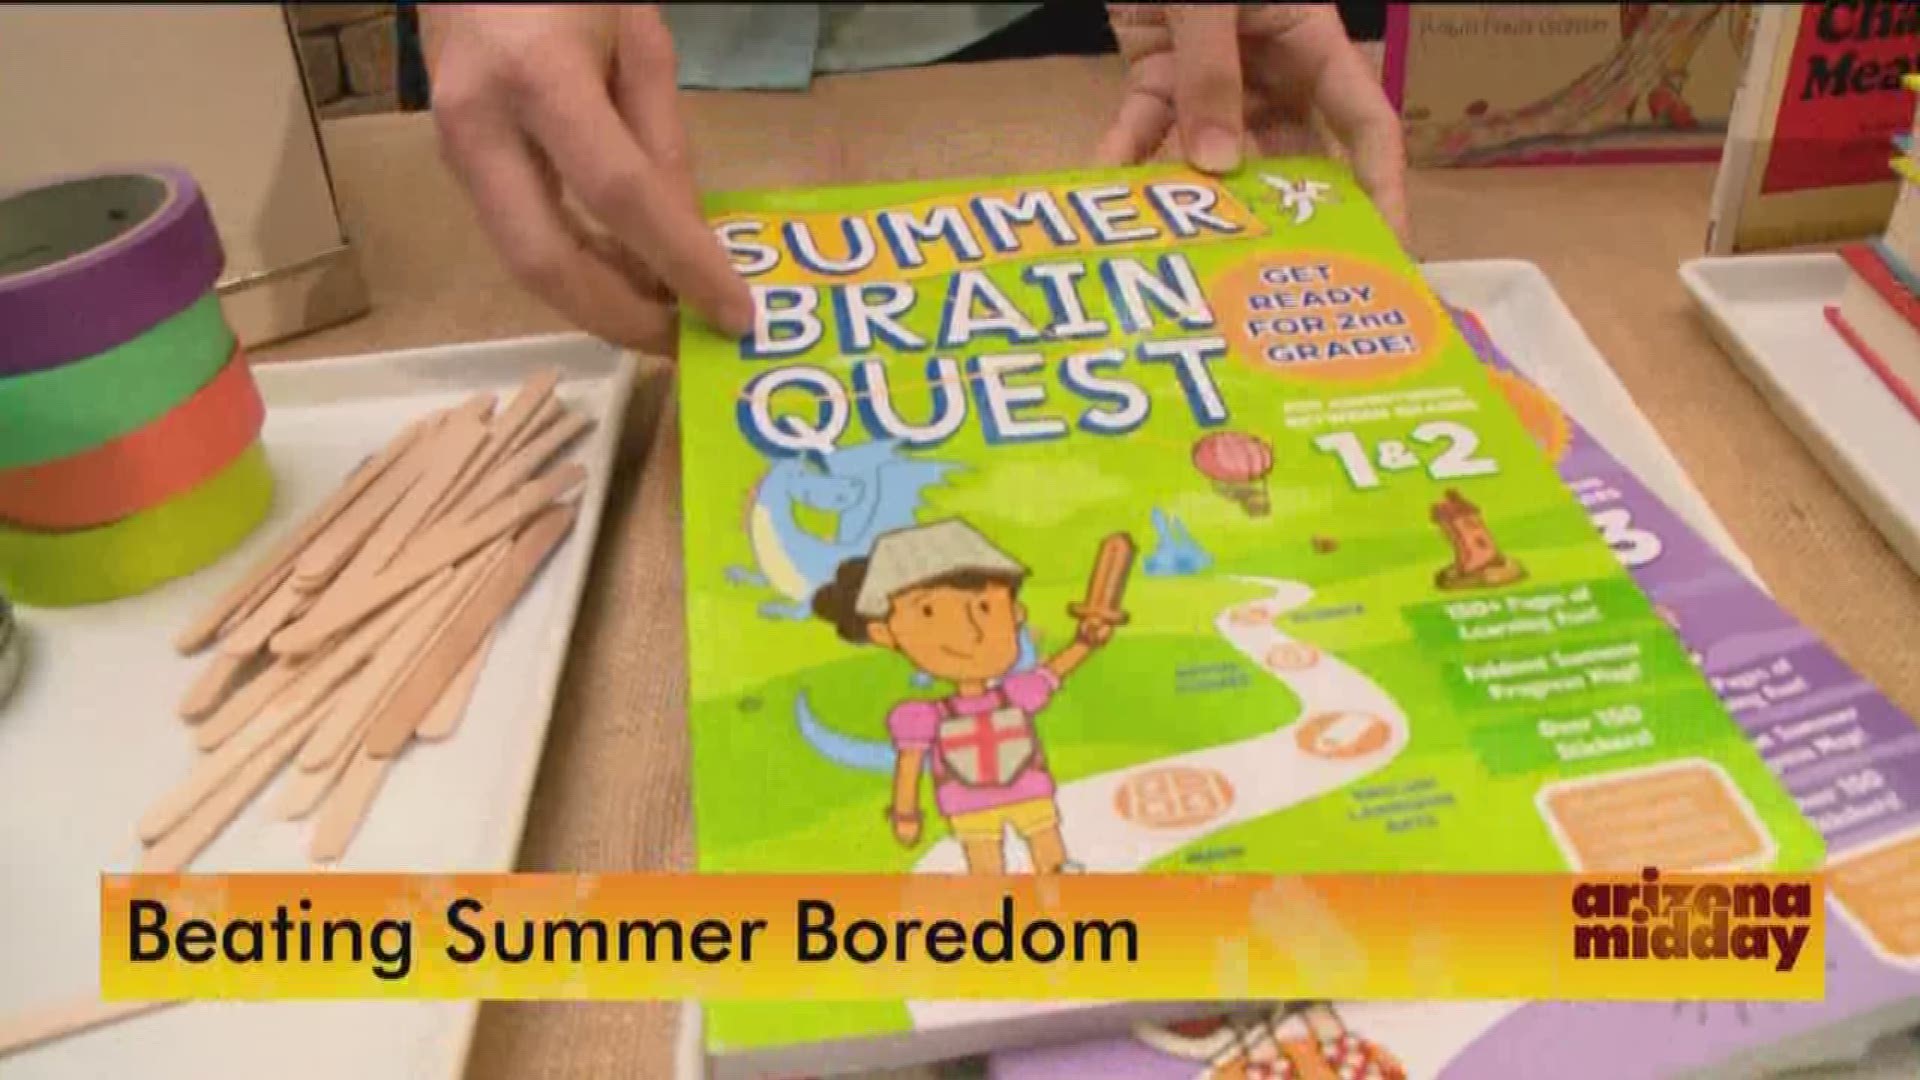 PagingSuperMom.com's Bettijo Hirschi shares tips to keep the kids entertained all summer long.